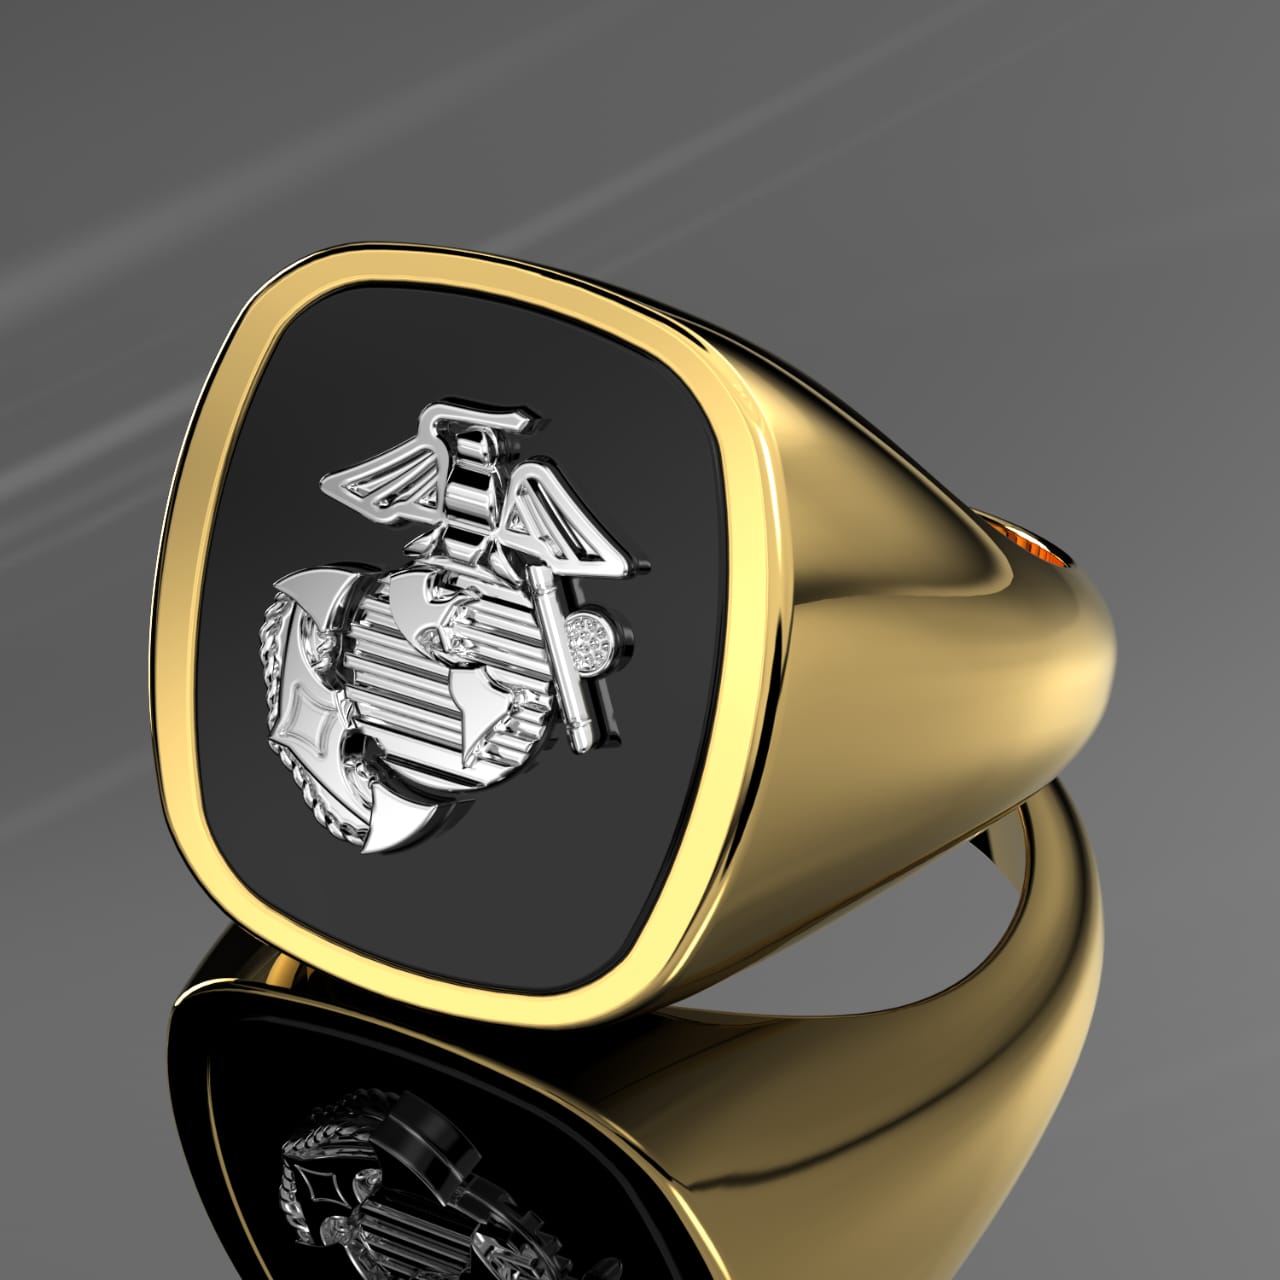 Customizable 10k or 14k Gold US Military Solid Back Ring, Army, Marine Corps, Navy